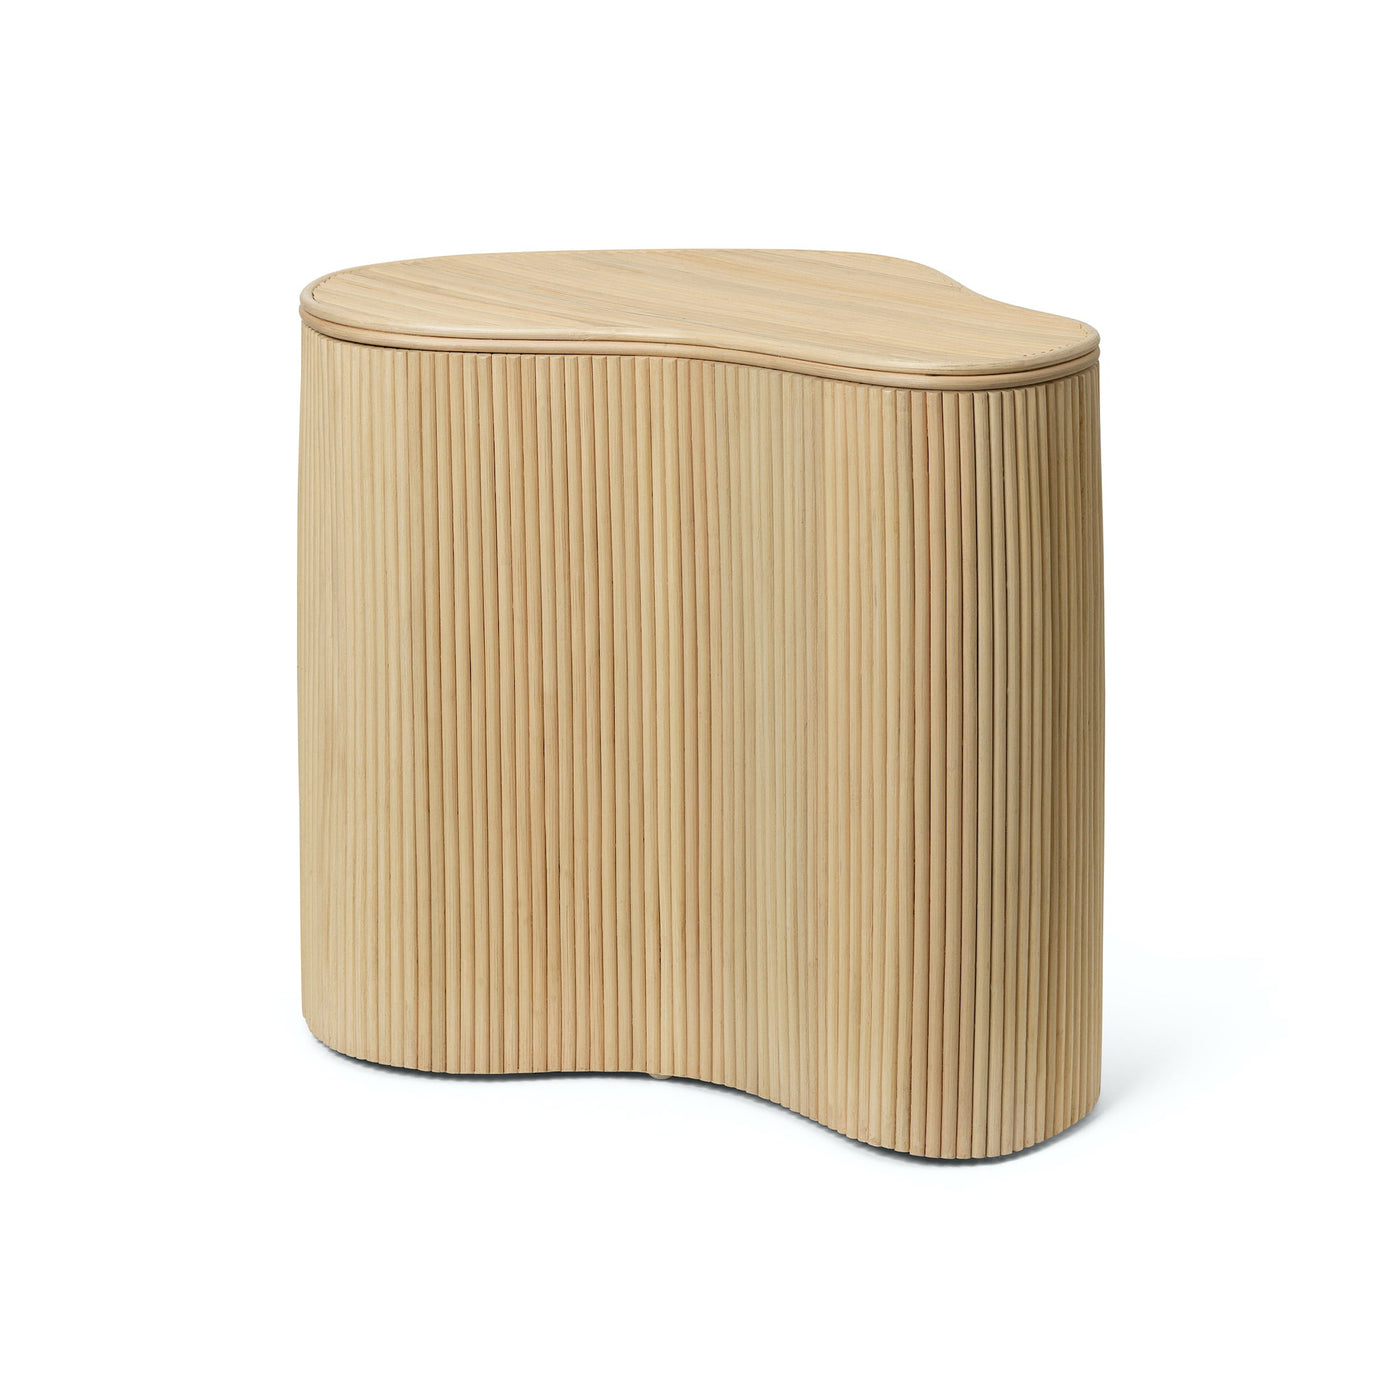 Ferm LIVING Isola storage table. Free UK delivery at someday designs